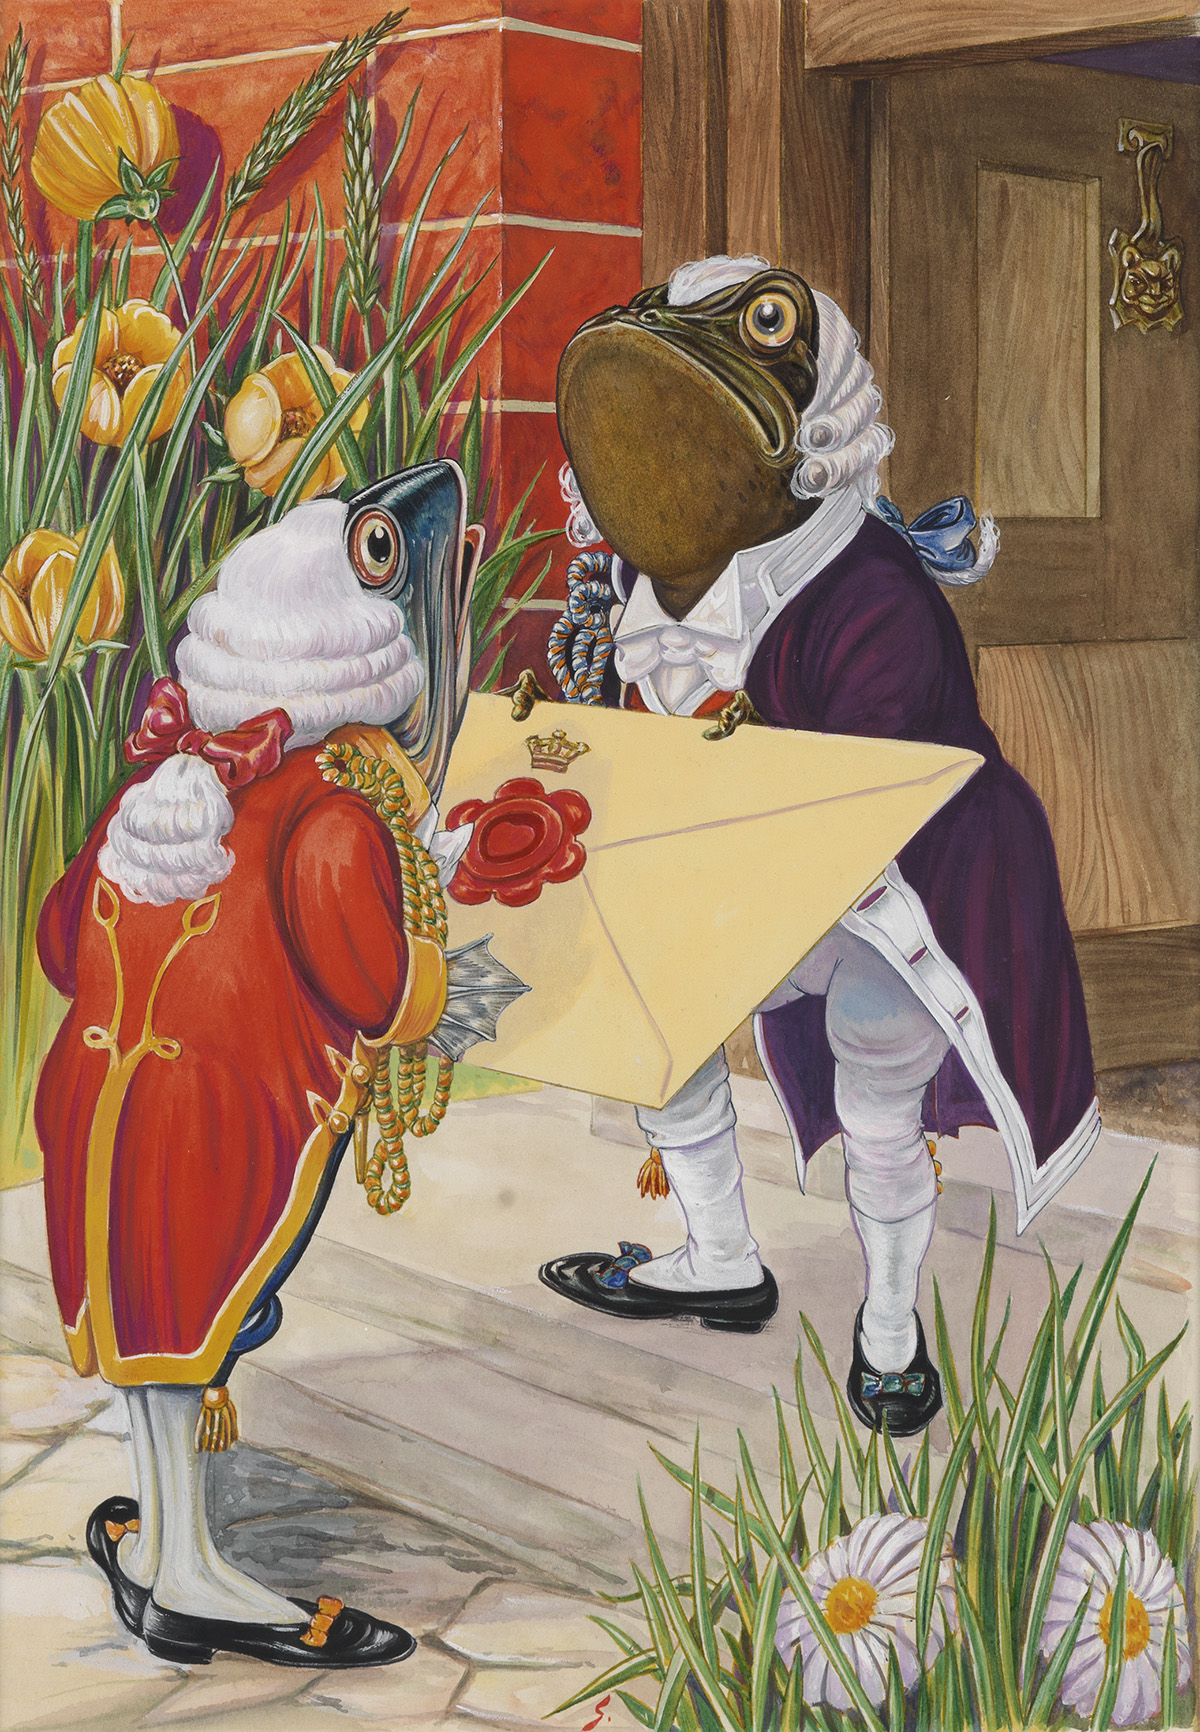 CHILDRENS ALICE IN WONDERLAND D. R. SEXTON. An invitation from the Queen to play croquet.